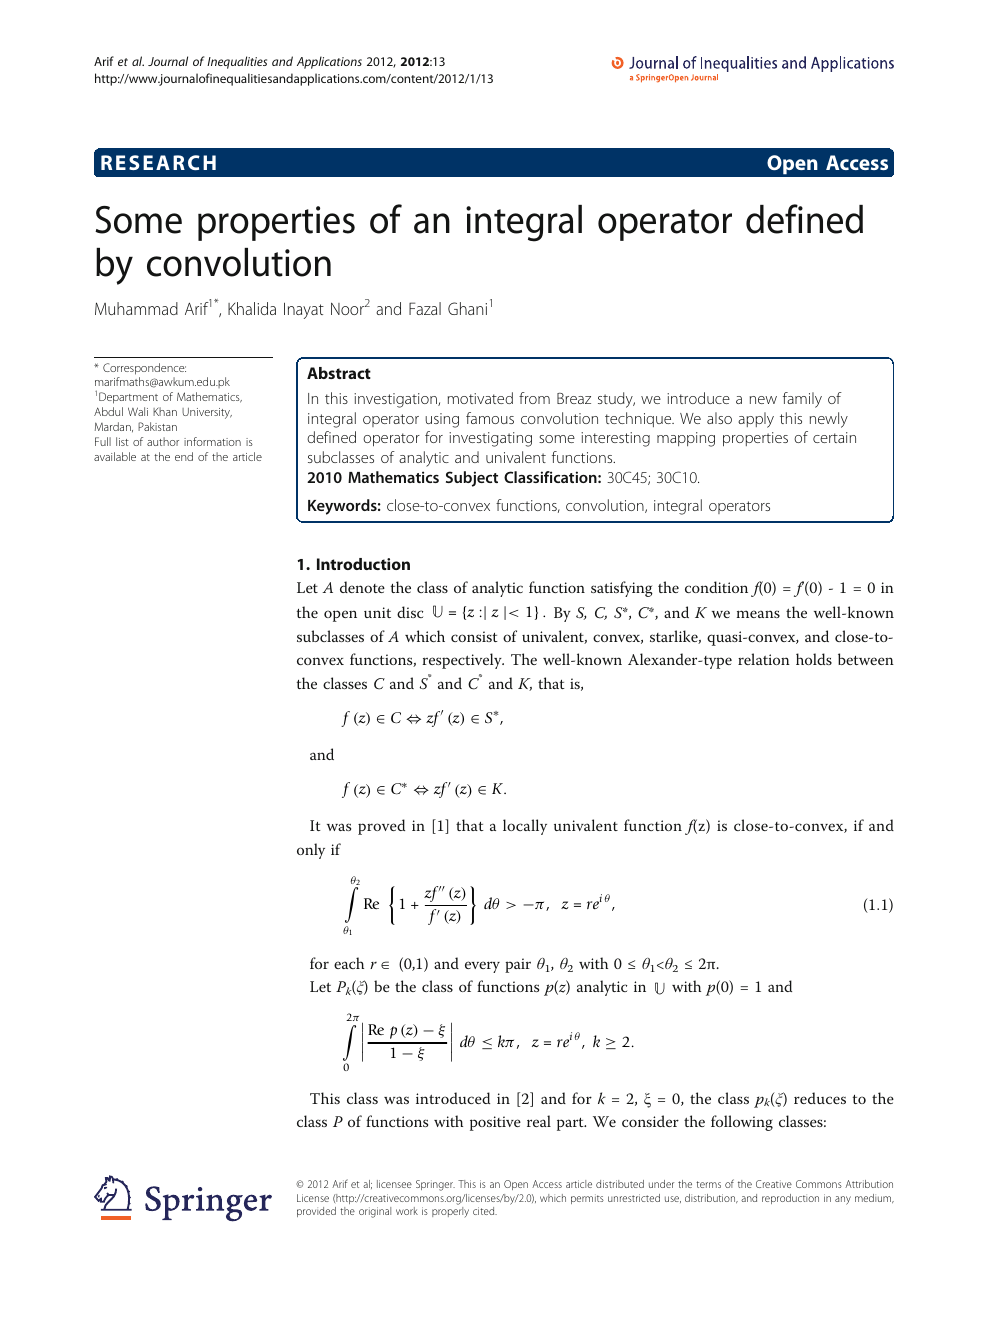 Some Properties Of An Integral Operator Defined By Convolution Topic Of Research Paper In Mathematics Download Scholarly Article Pdf And Read For Free On Cyberleninka Open Science Hub